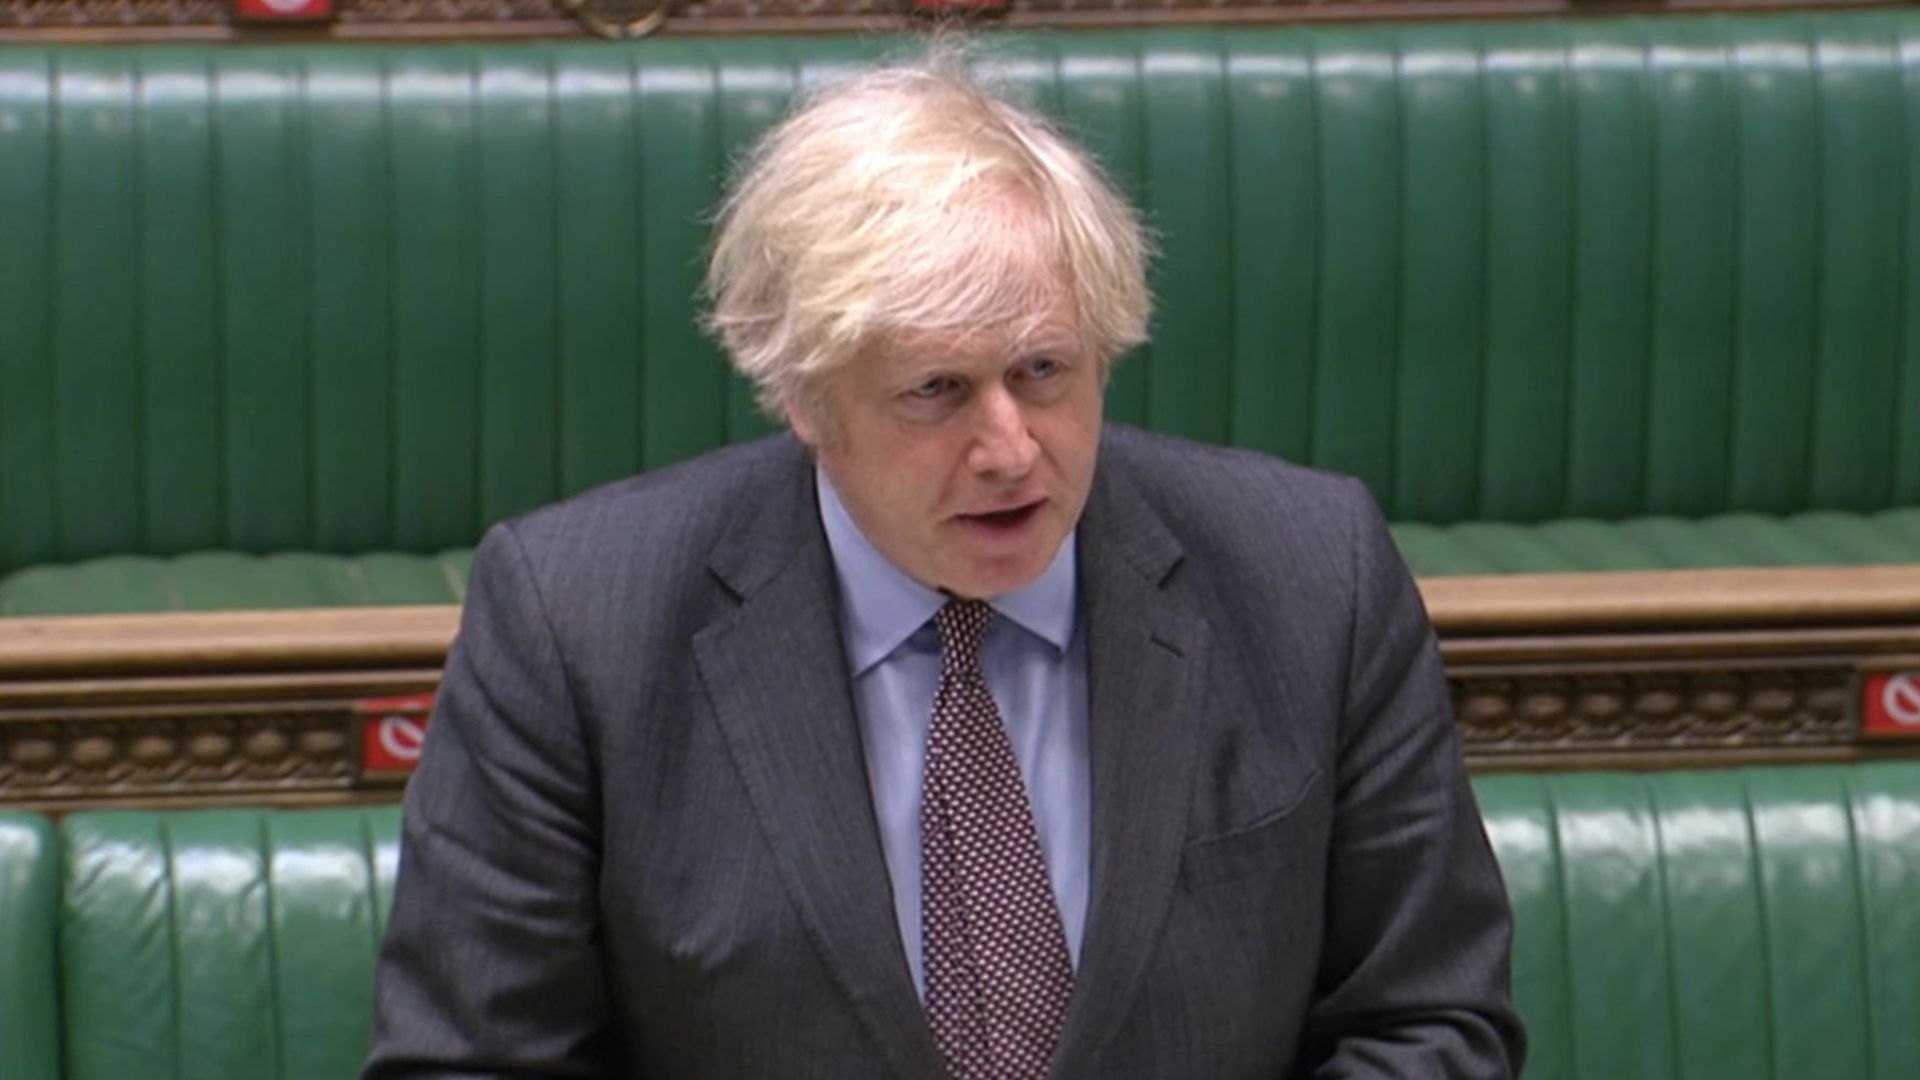 Prime Minister Boris Johnson speaks during Prime Minister's Questions - Credit: PA